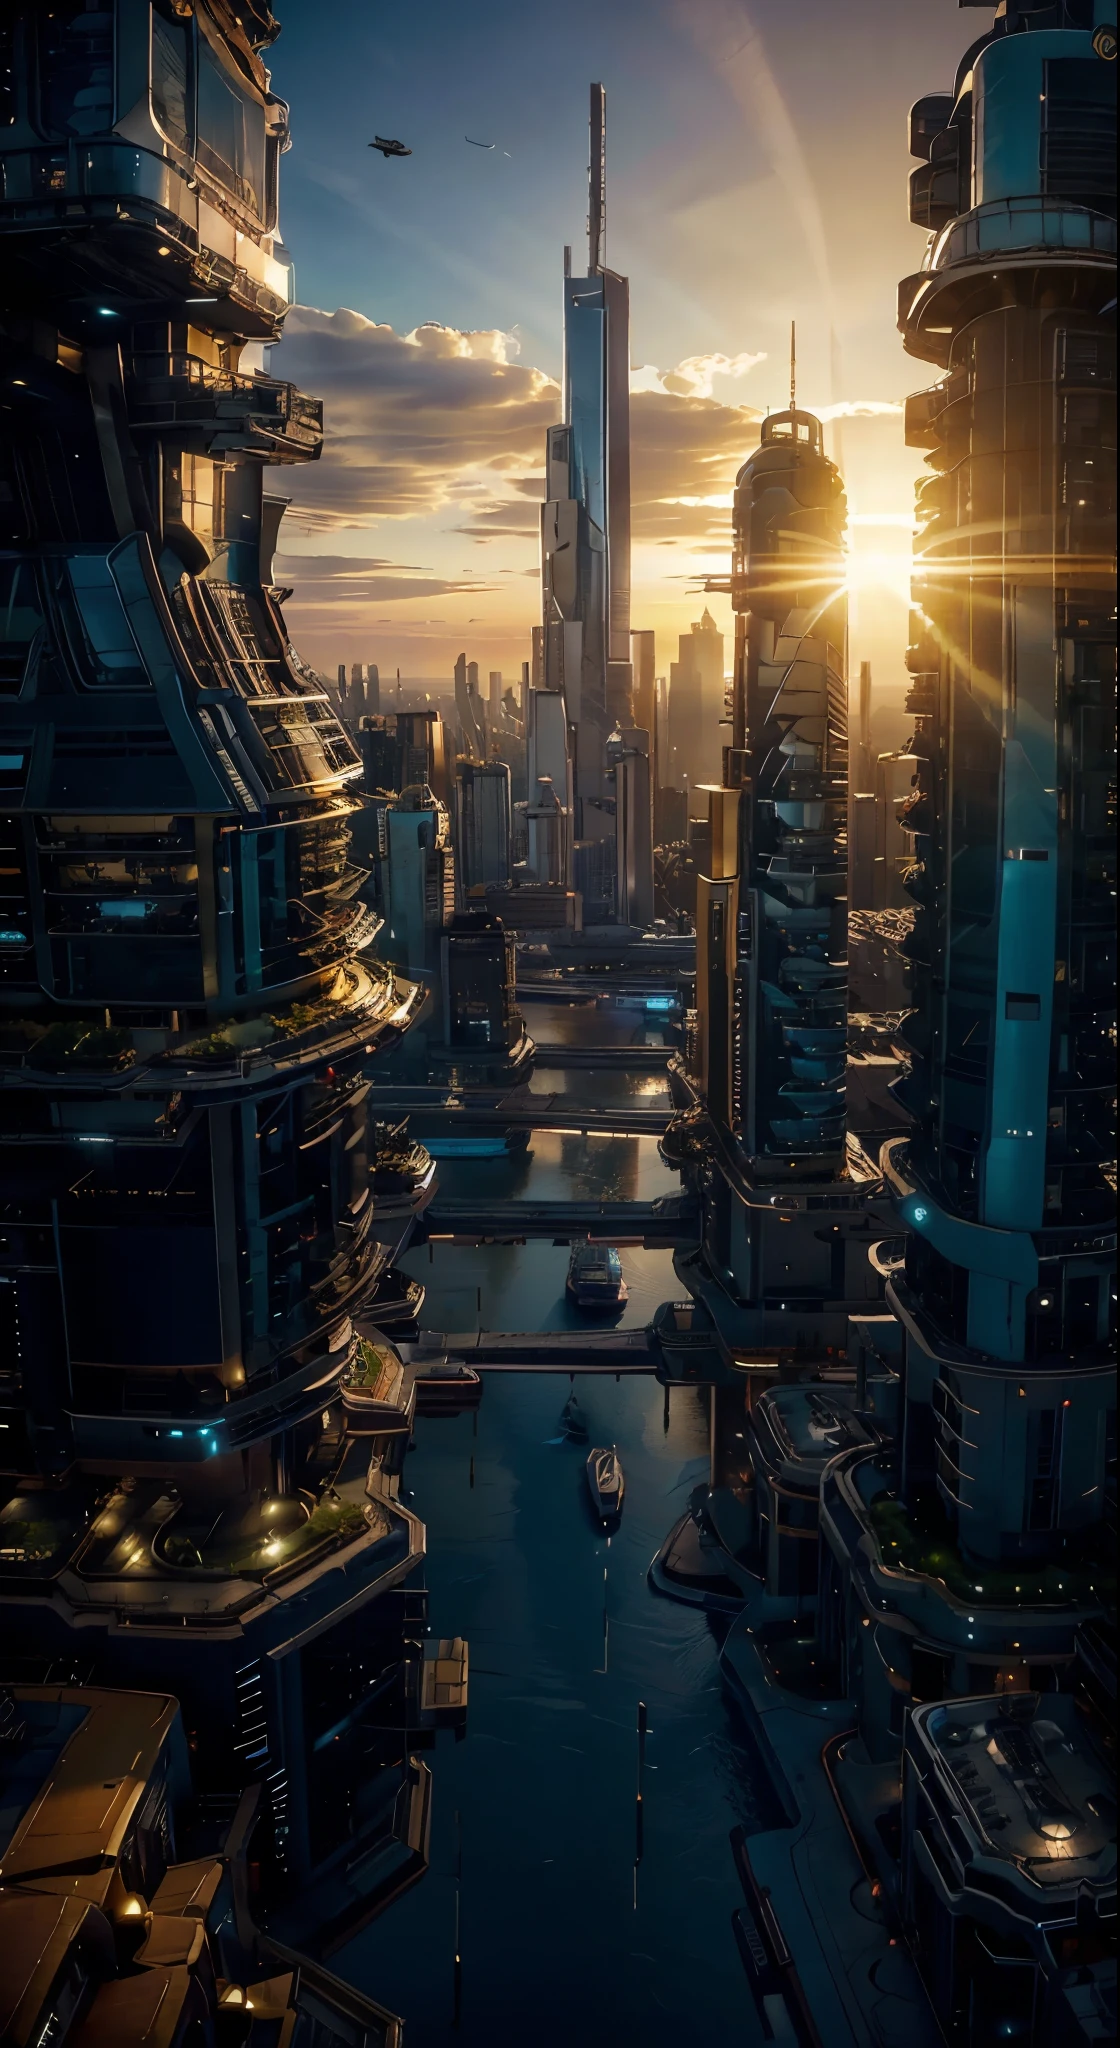 sunset view, golden hour, seen from an airplane,future city:1.3,port,flying spaceship,skyscraper, universe glimpse in the sky,master piece,highest quality,ultra high resolution,(Super detailed:1.2),8K,photorealistic,best aesthetic,beautiful